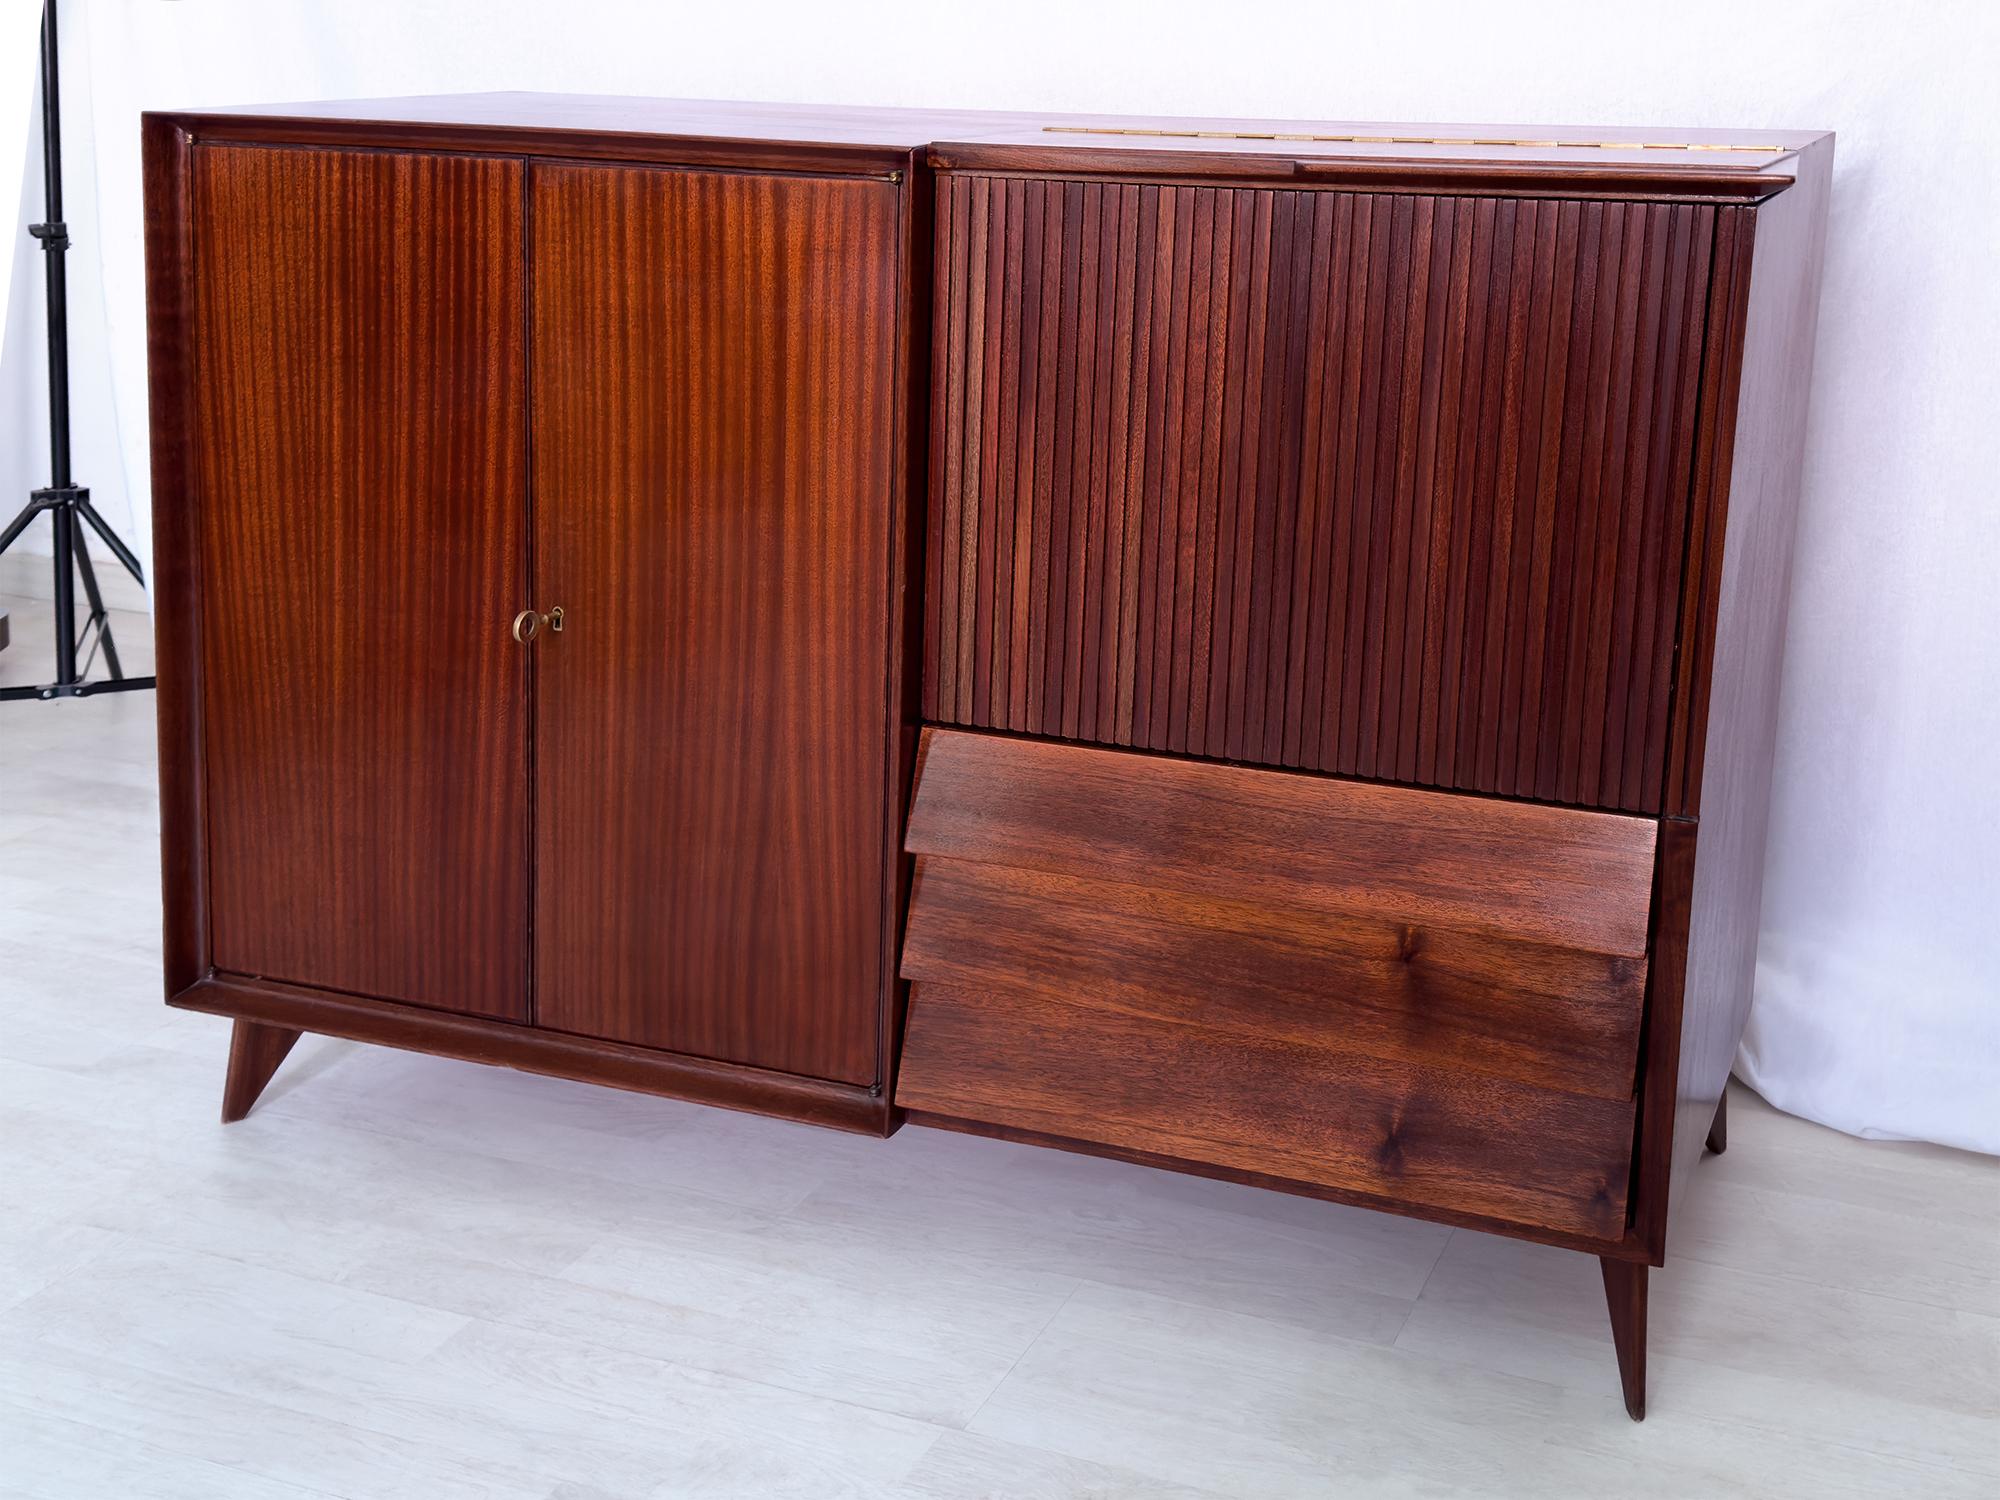 Italian Mid-Century Teak Wood Sideboard with Bar Cabinet by Vittorio Dassi, 1950s For Sale 1